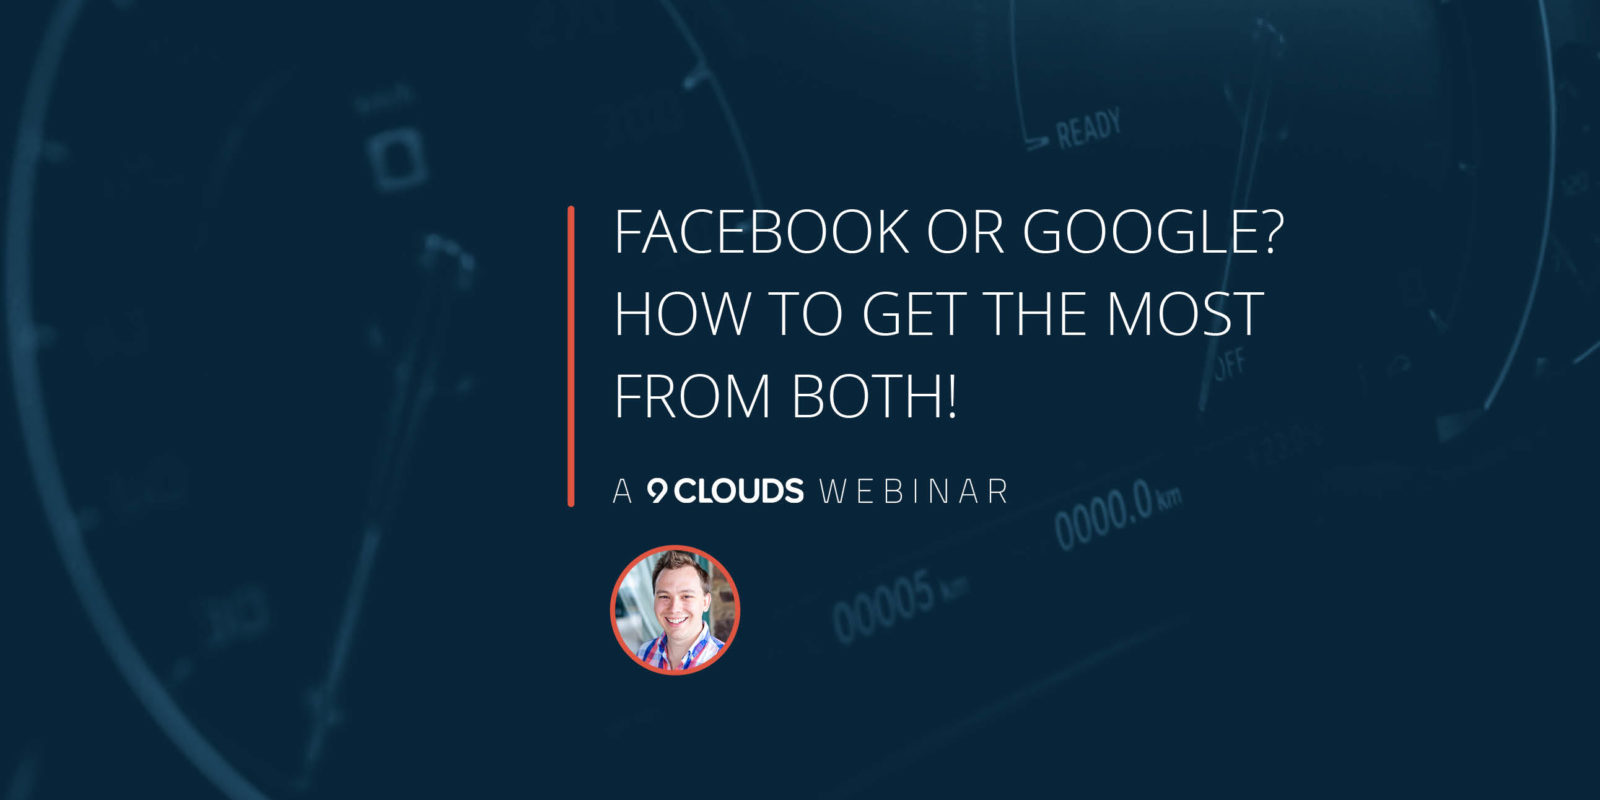 [Digital Dealer 2021] Facebook Or Google? How to Get the Most from Both